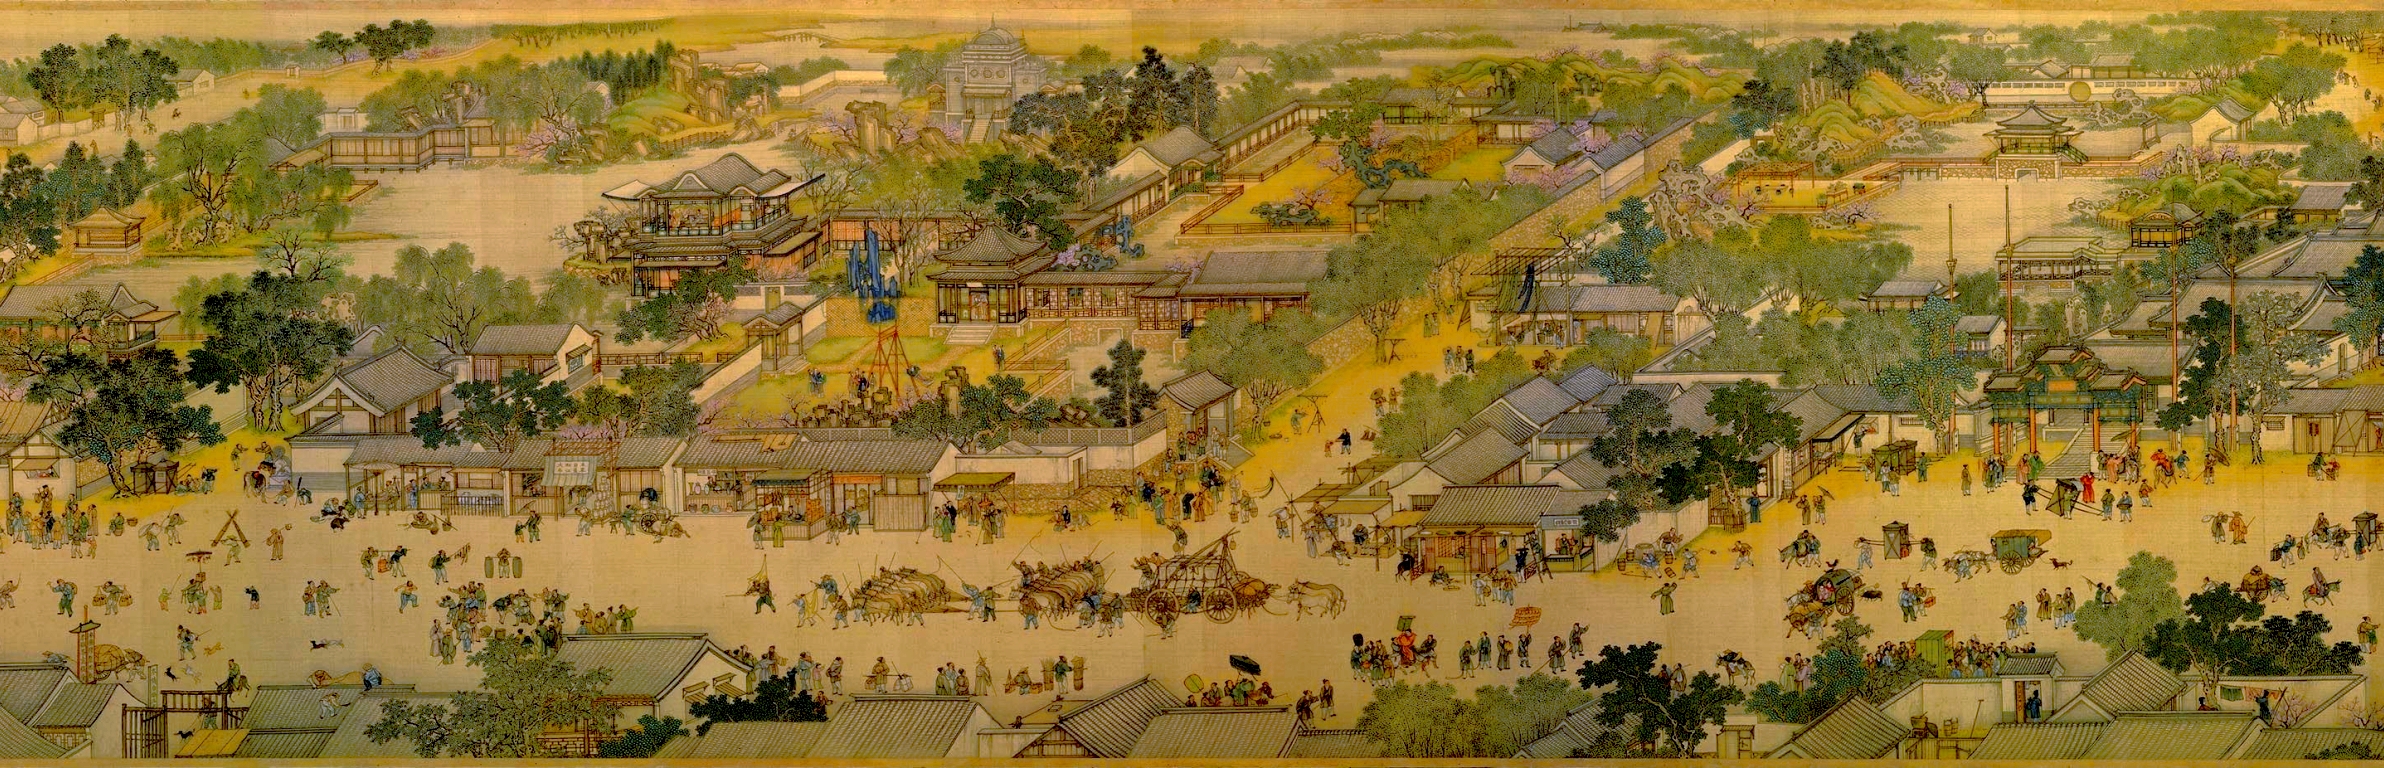 Along the River During the Qingming Festival Alchetron, the free